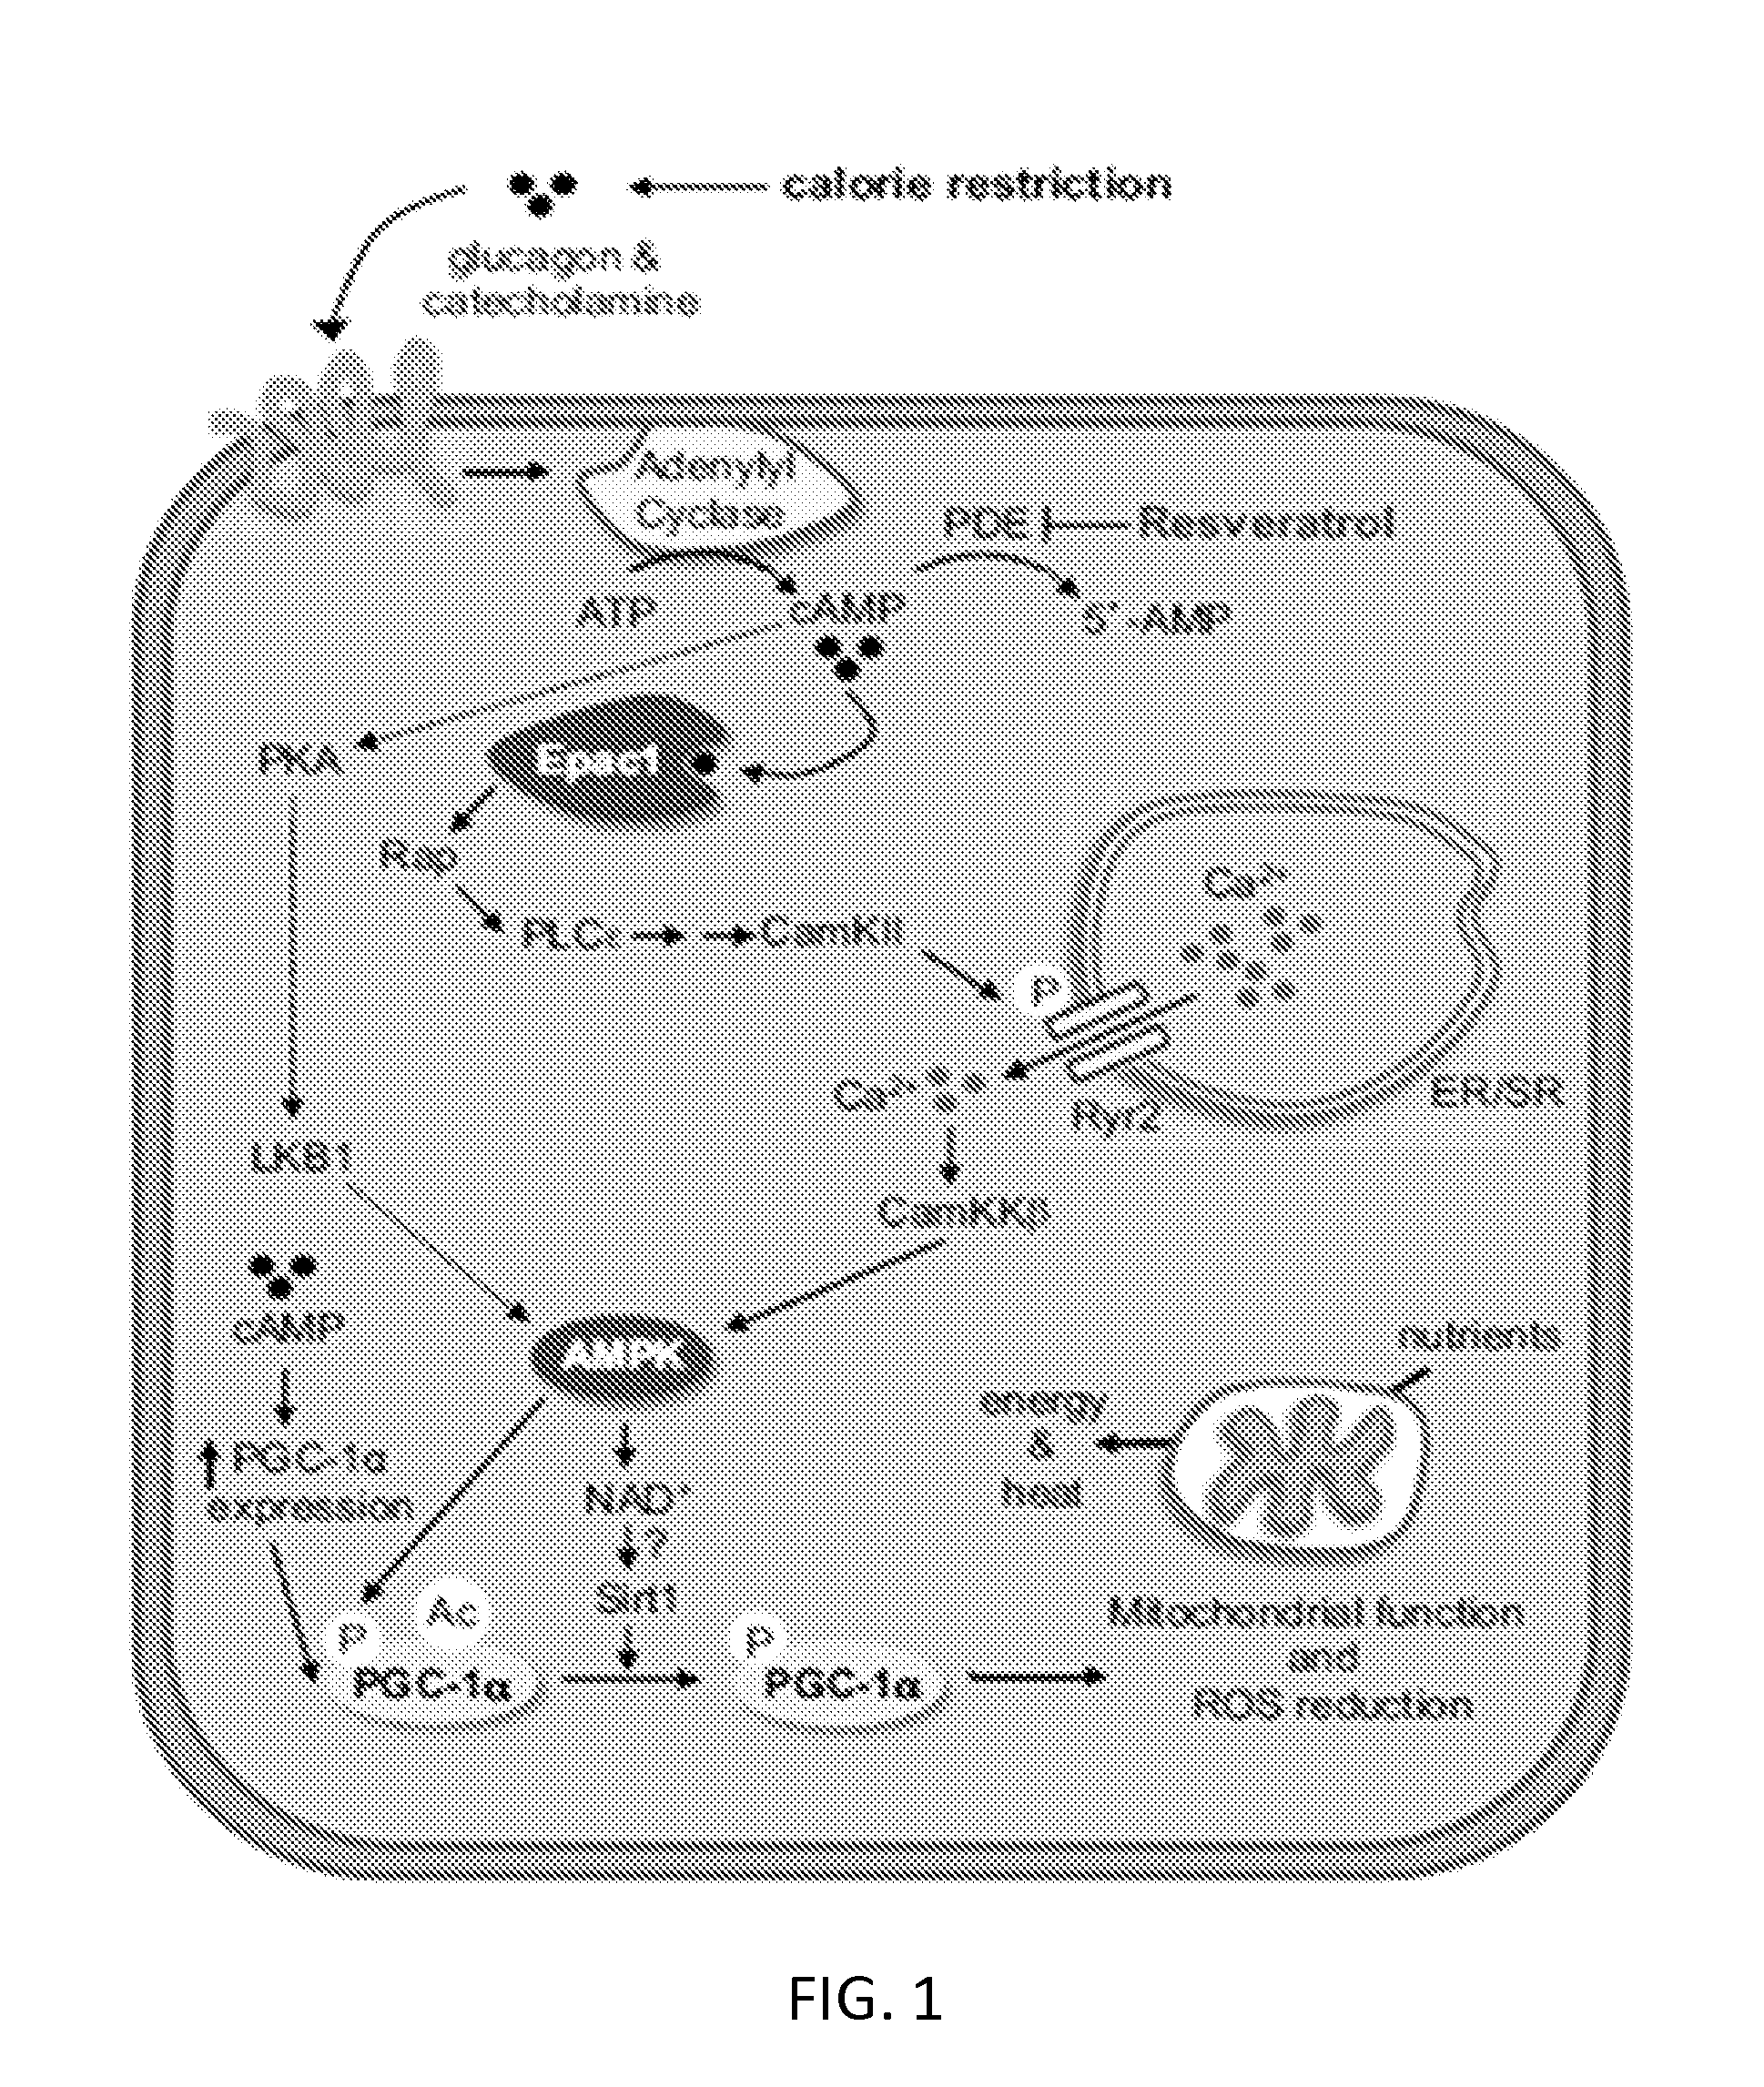 Compositions and methods for the reduction or prevention of hepatic steatosis